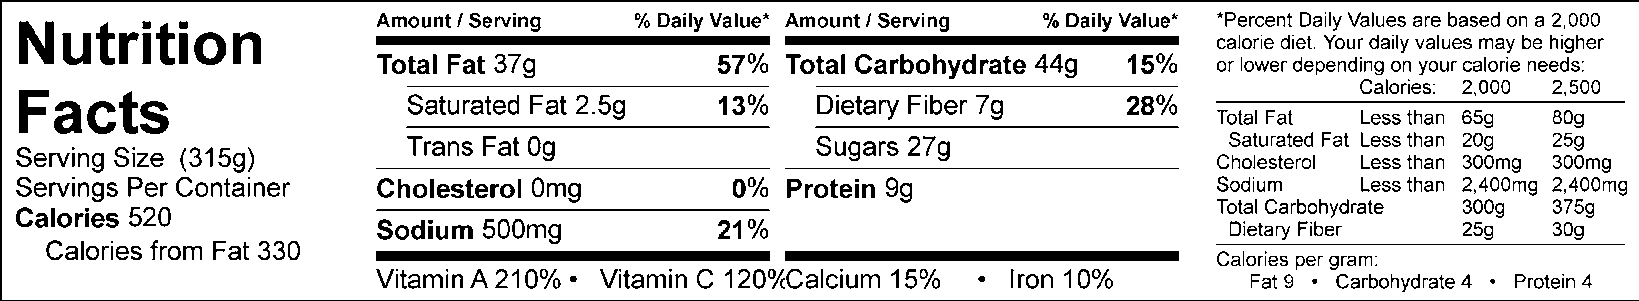 Nutrition facts, with 315g serving size 520 calories, 330 calories from fat